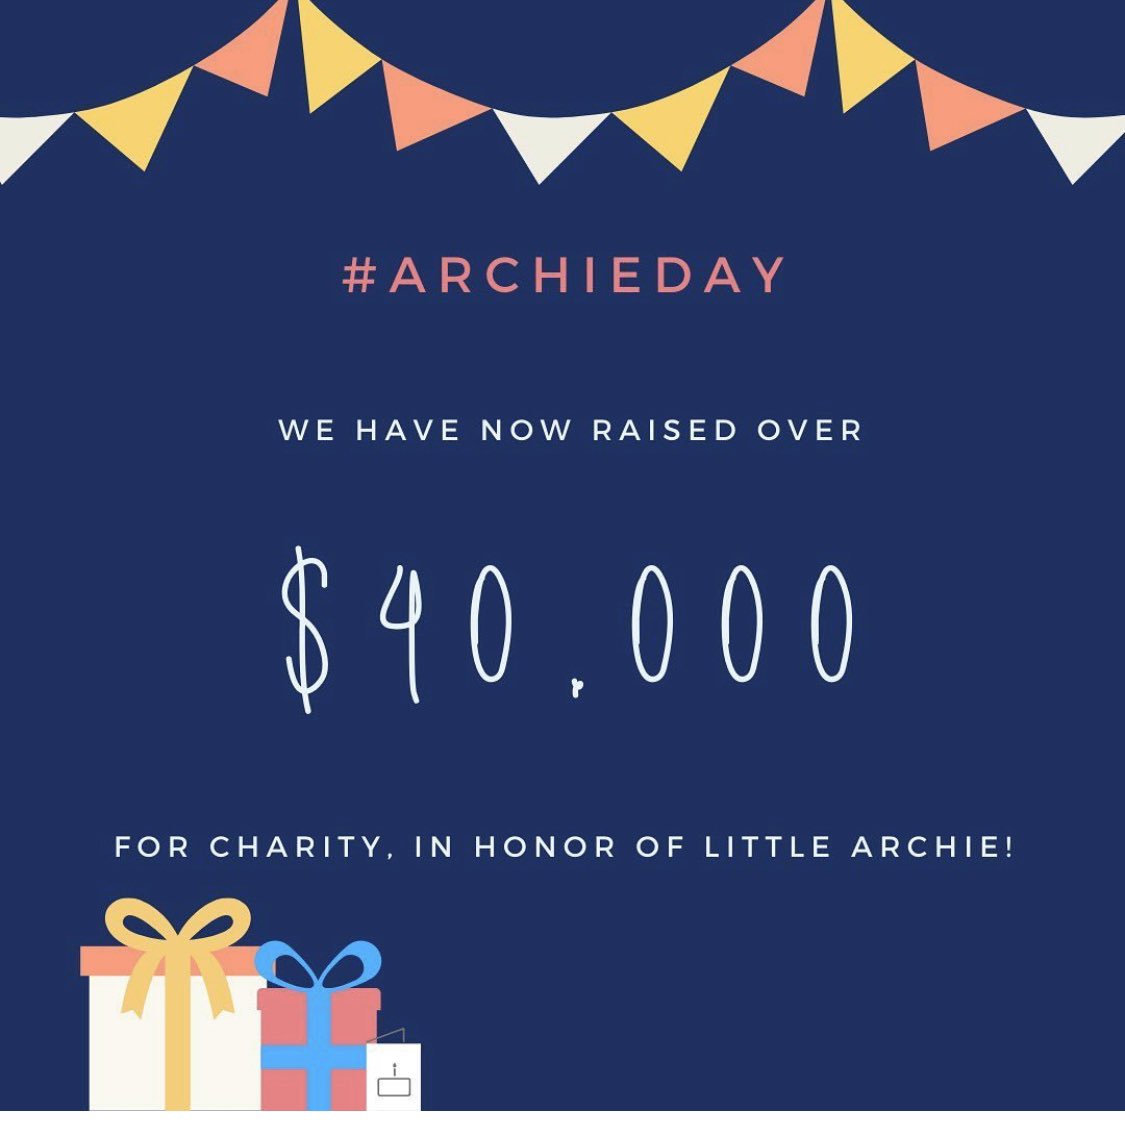  LET’S KEEP GOING!Please donate to support charities associated with  #ArchieDay or you local org to help kids and families through  #Covid_19   #Stayhome    @Nourishnp  @ChildrensAidNYC  @BGCCAN   @WellChild  @ProjAngelFood  @felixprojectuk  #HubbcommunityKitchen